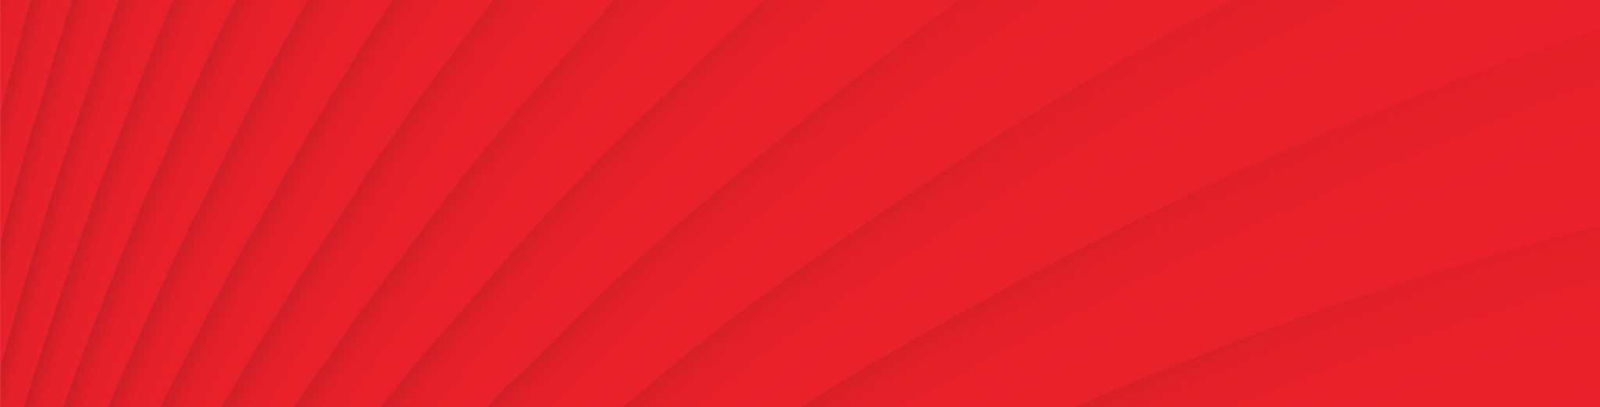 red stripped banner image